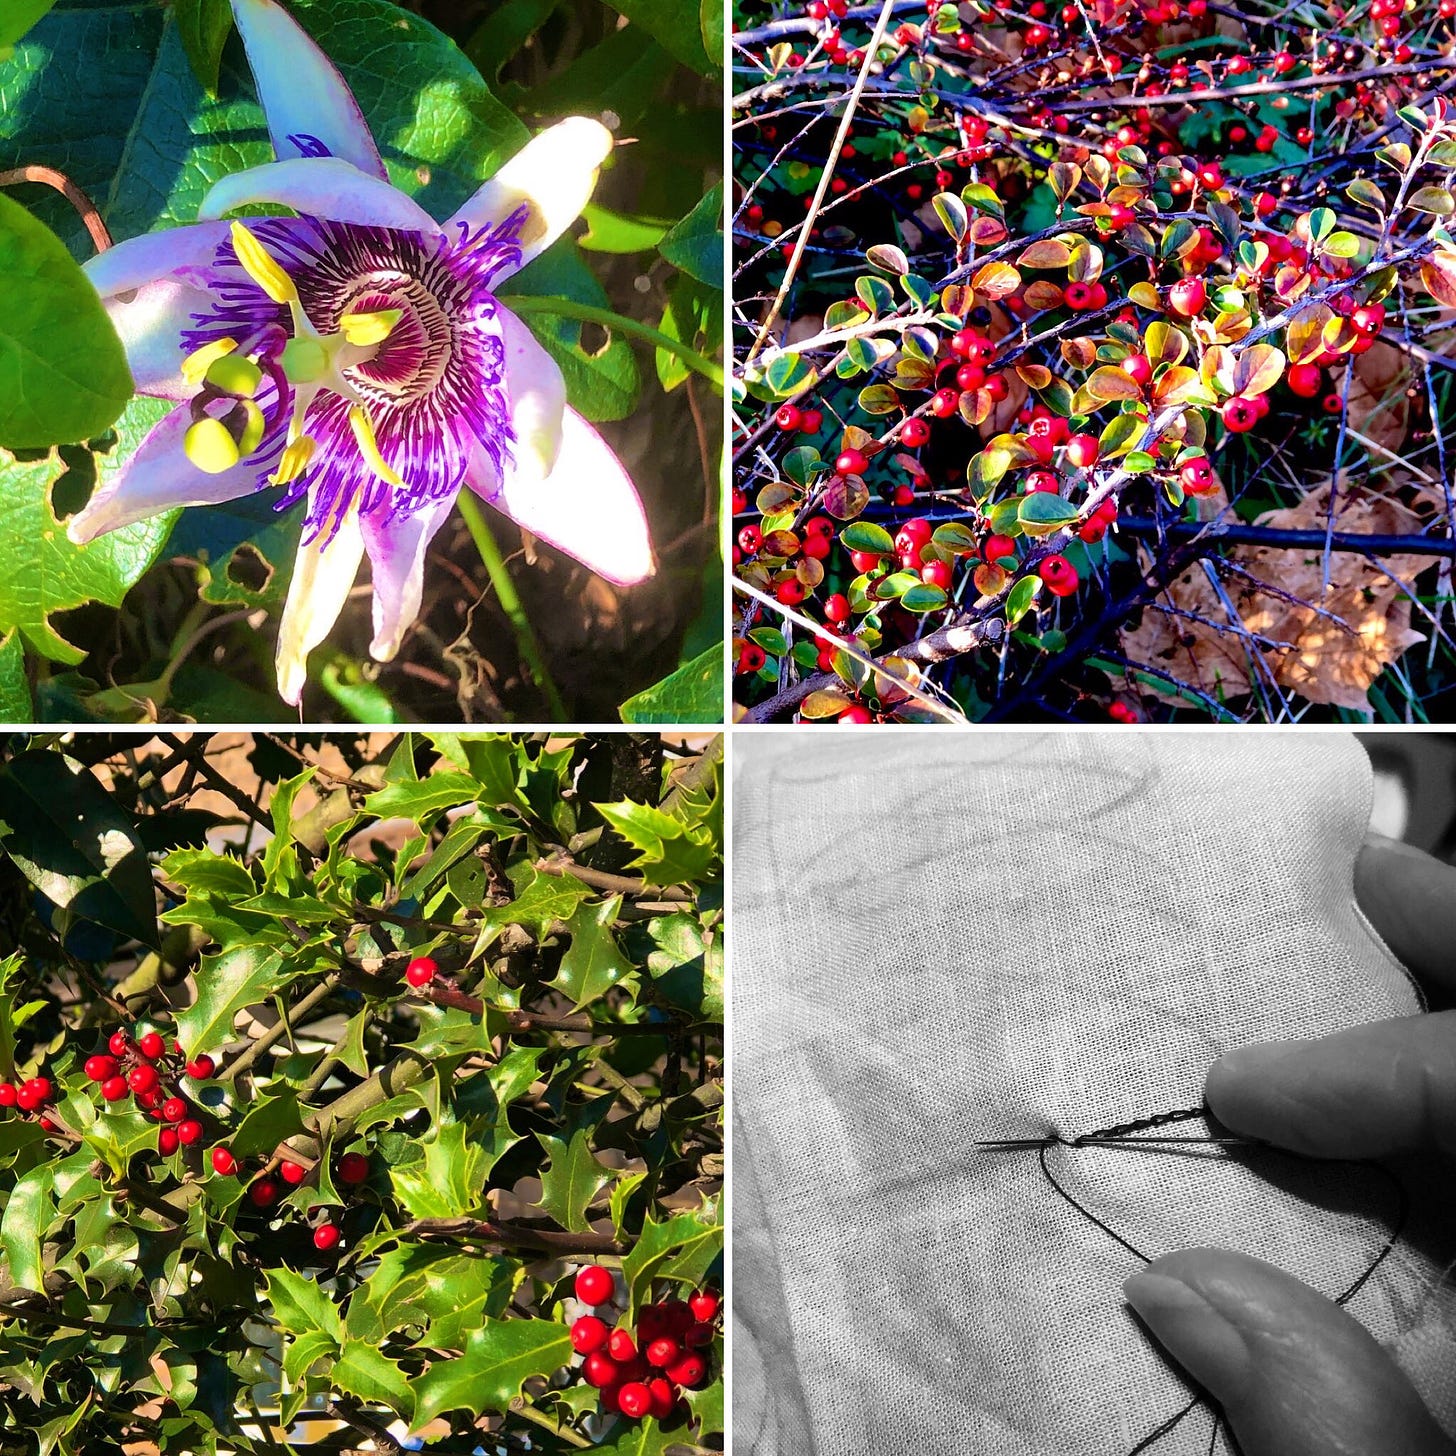 A grid of four images: Top left: a passionflower in bloom; Top left: red berries on a cotoneaster bush; bottom left: holly with red berries: bottom right:a black and white image of a hand pushing a needle through cloth.